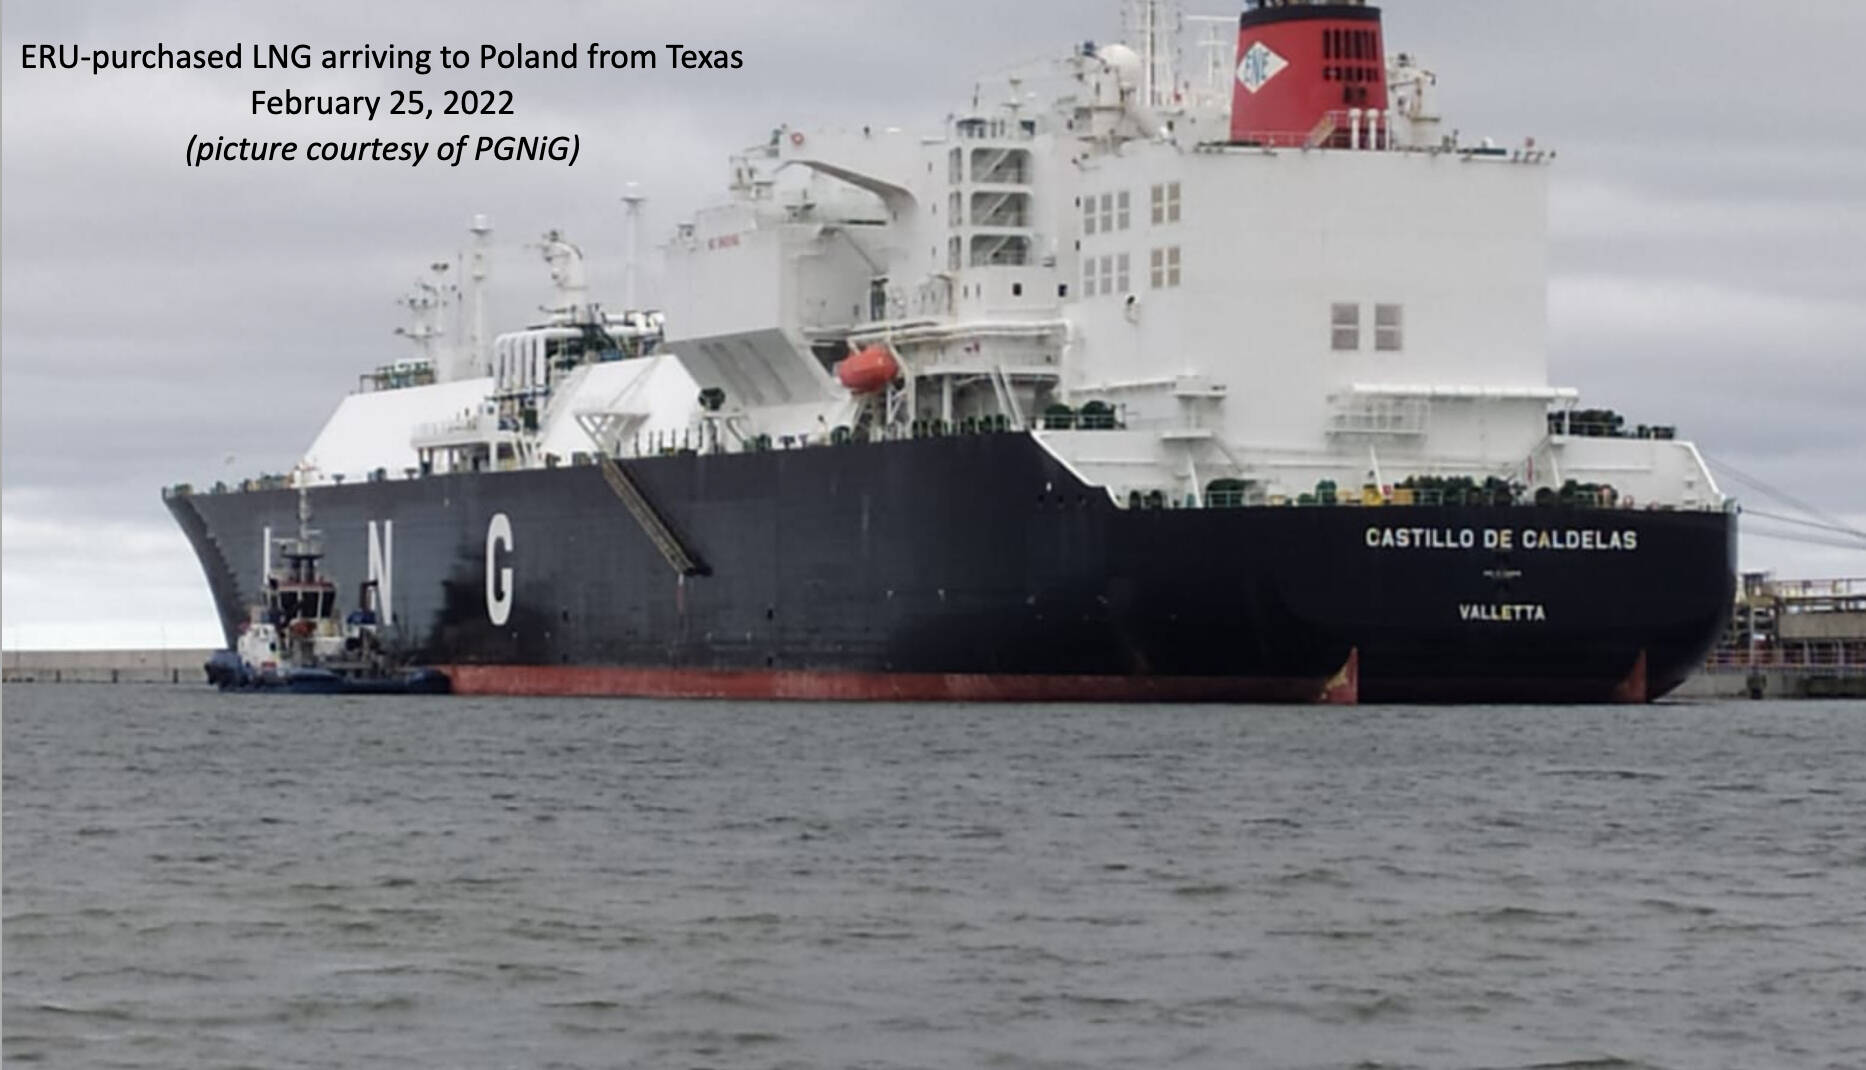 Ship carrying ERU-purchased LNG arriving to Poland from Texas, Feb. 25, 2022. PGNiG courtesy photo